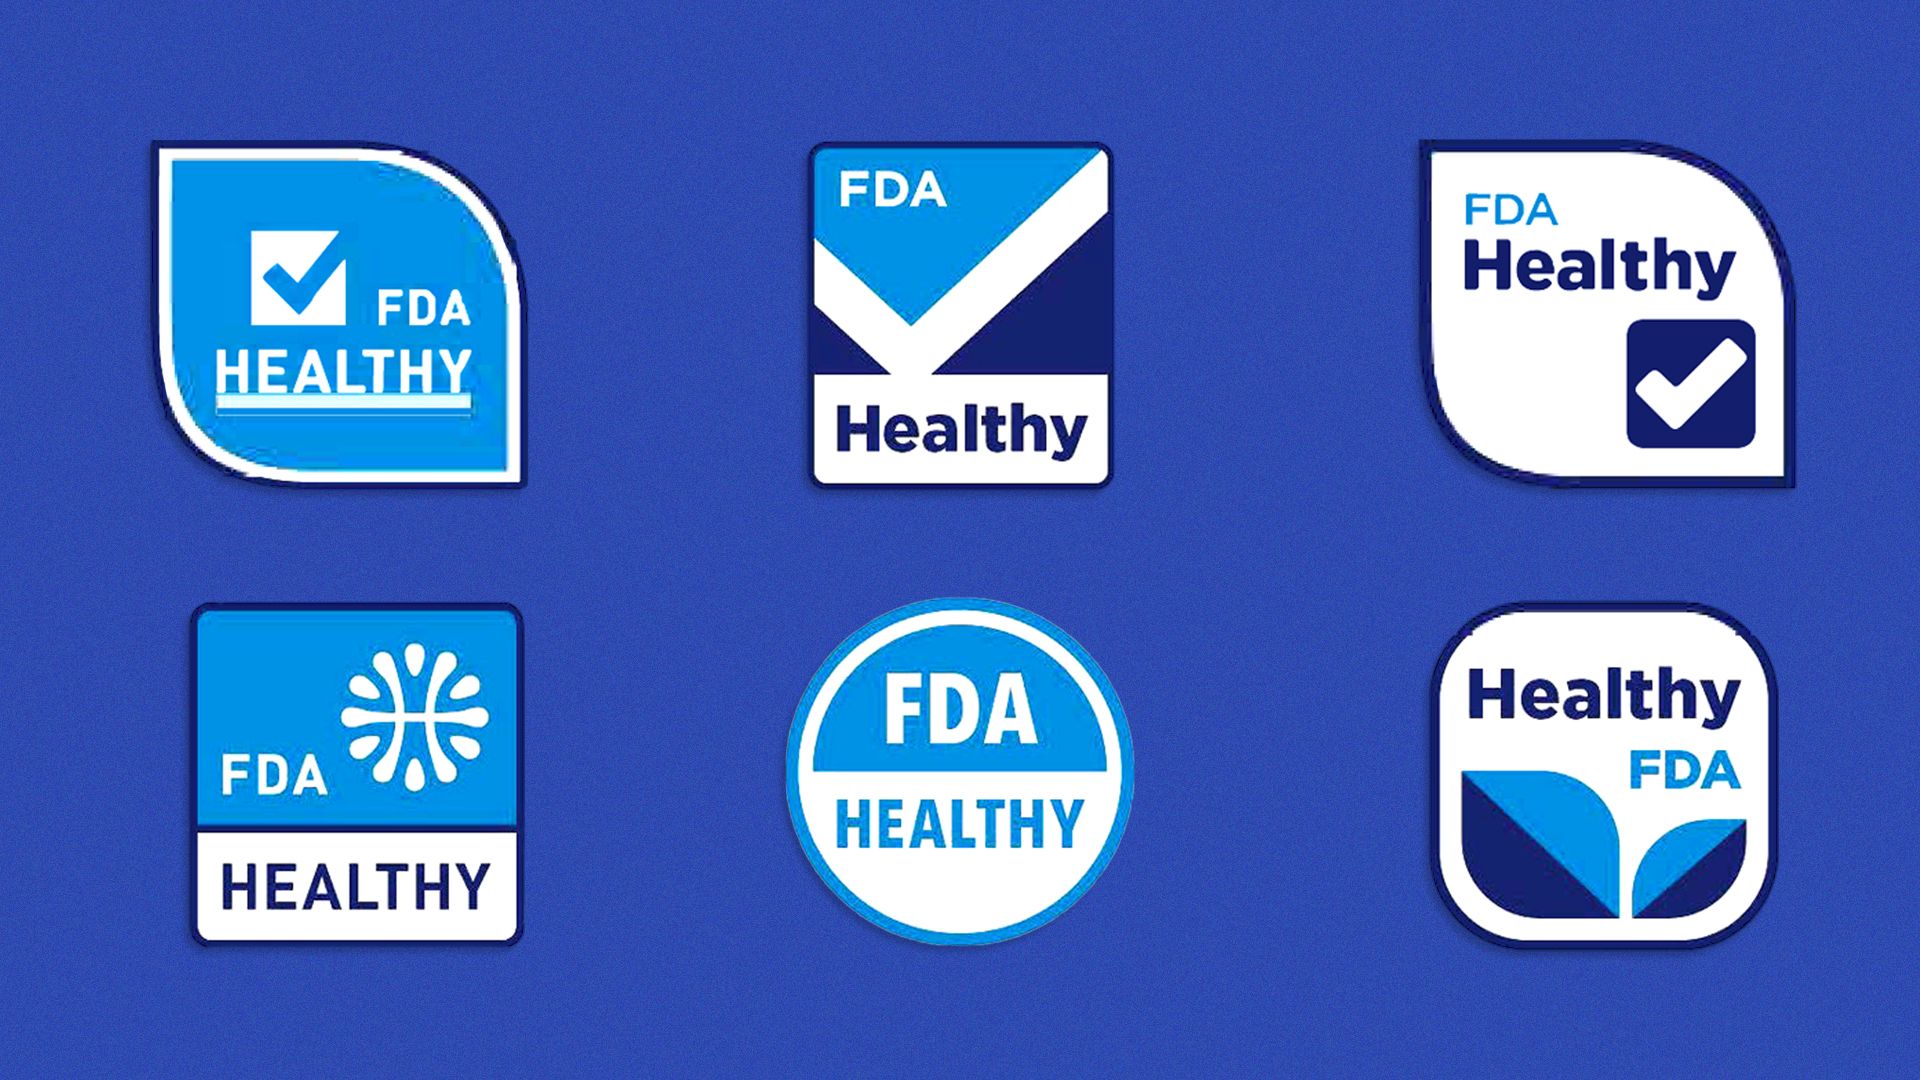 Some of the FDA's proposed "healthy" food labels.